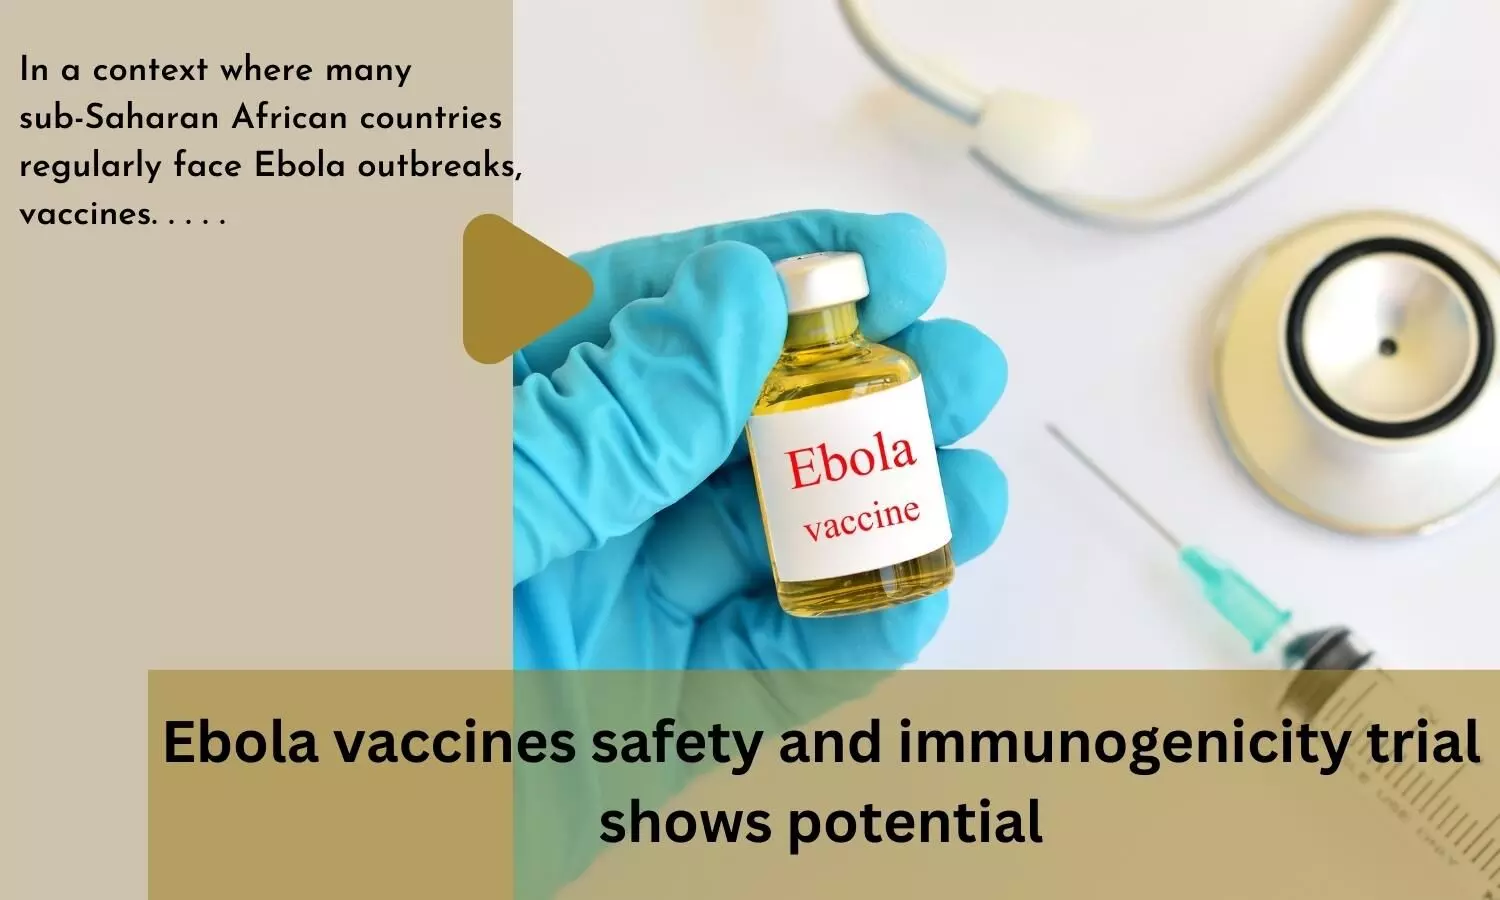 Ebola vaccines safety and immunogenicity trial shows potential